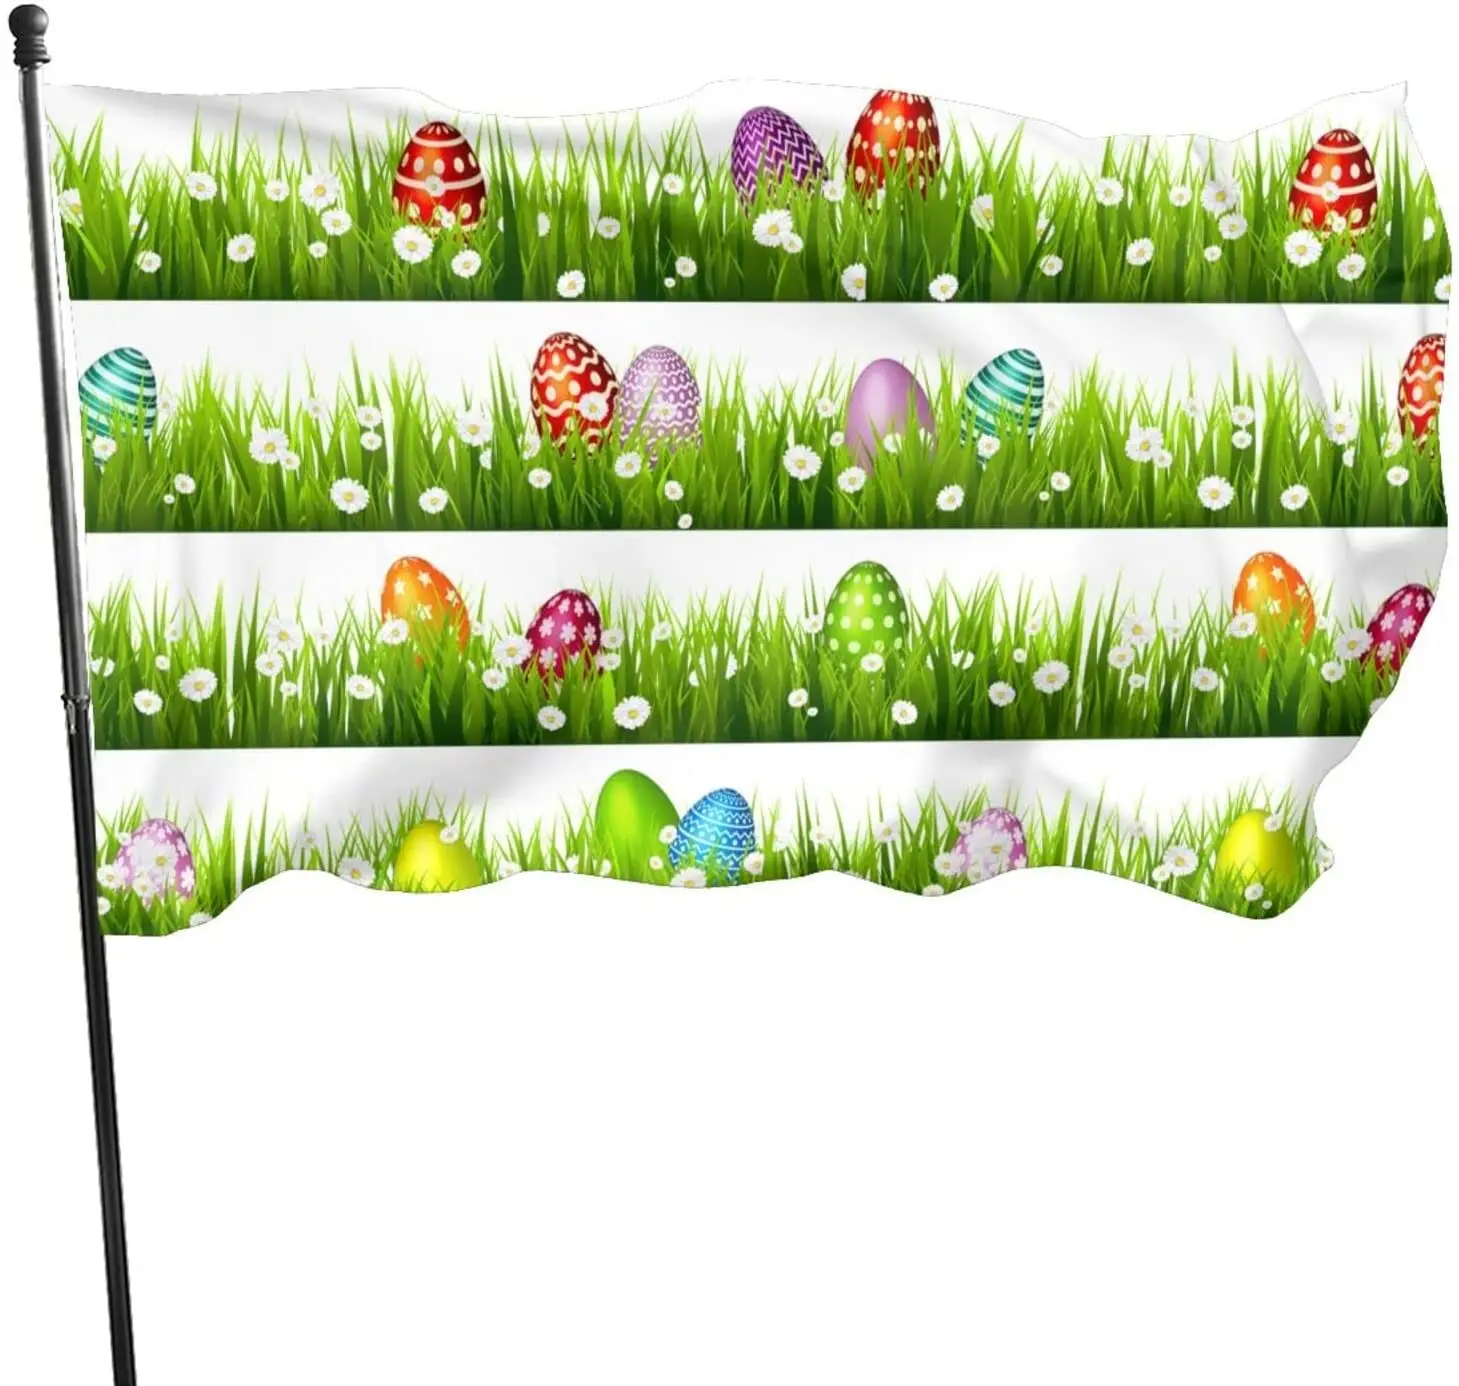 

Colorful Easter Egg Daisy Flowers Flag Sewn Polyester Banner Outside Hanging Standard Flag for Yard Garden Lawn Holiday